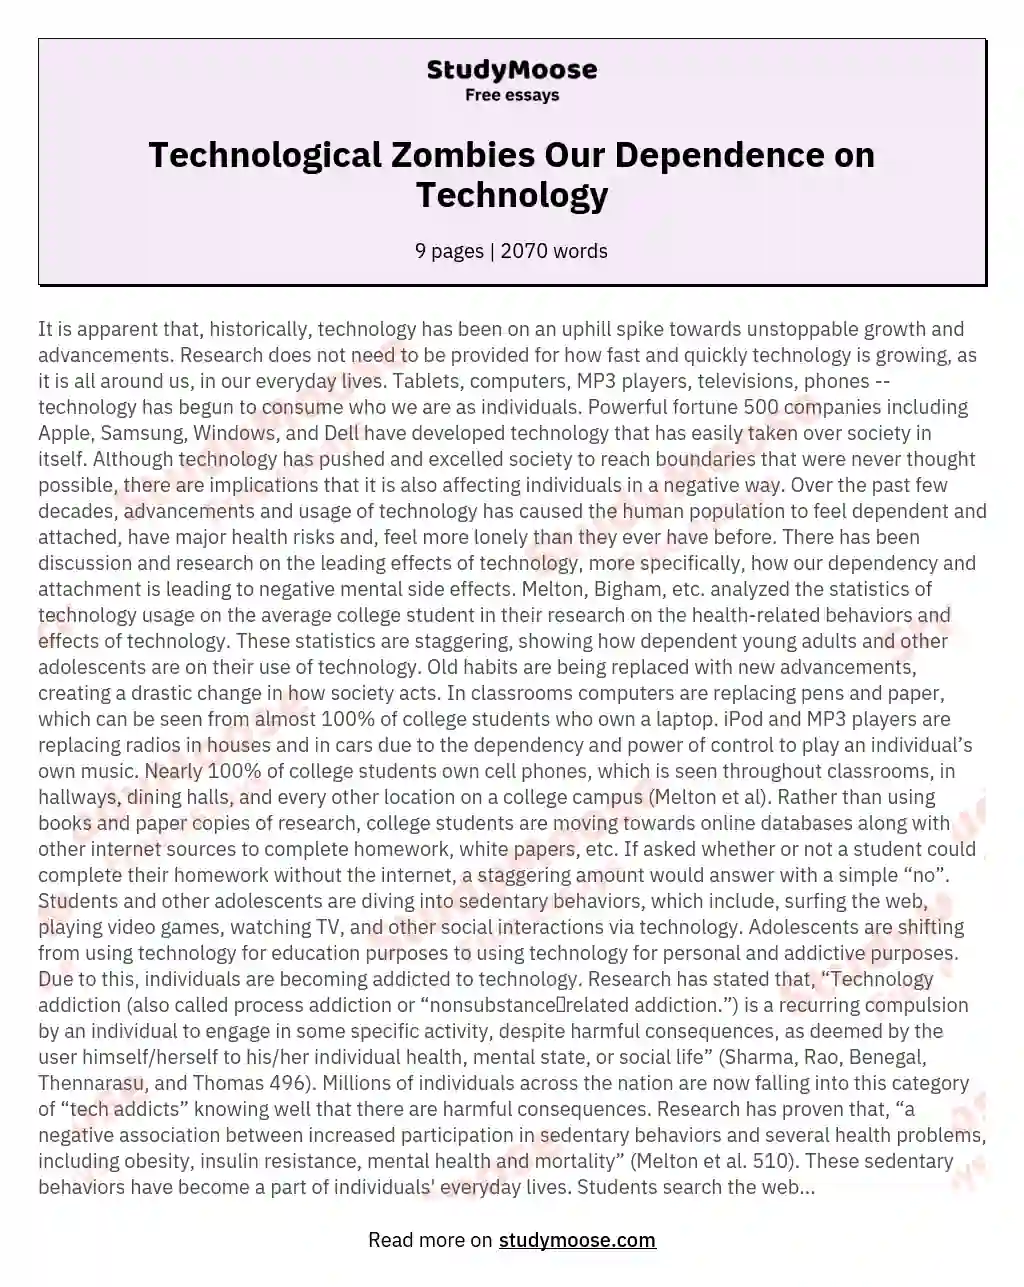 Technological Zombies Our Dependence on Technology essay